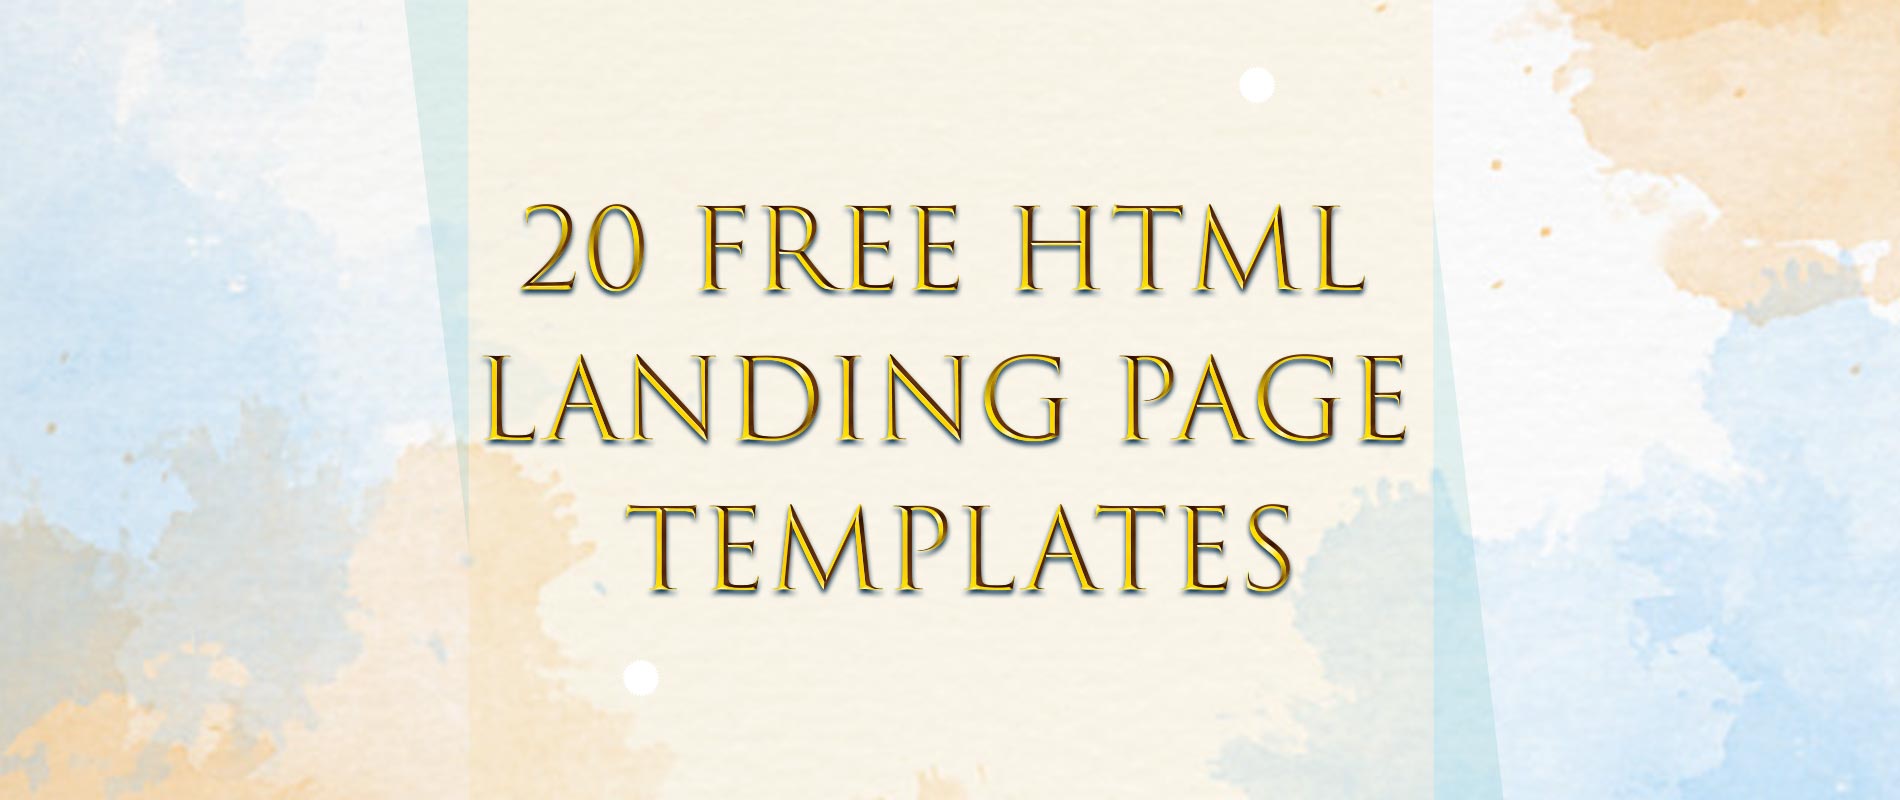 You are currently viewing 20 Free Html Landing Page Templates